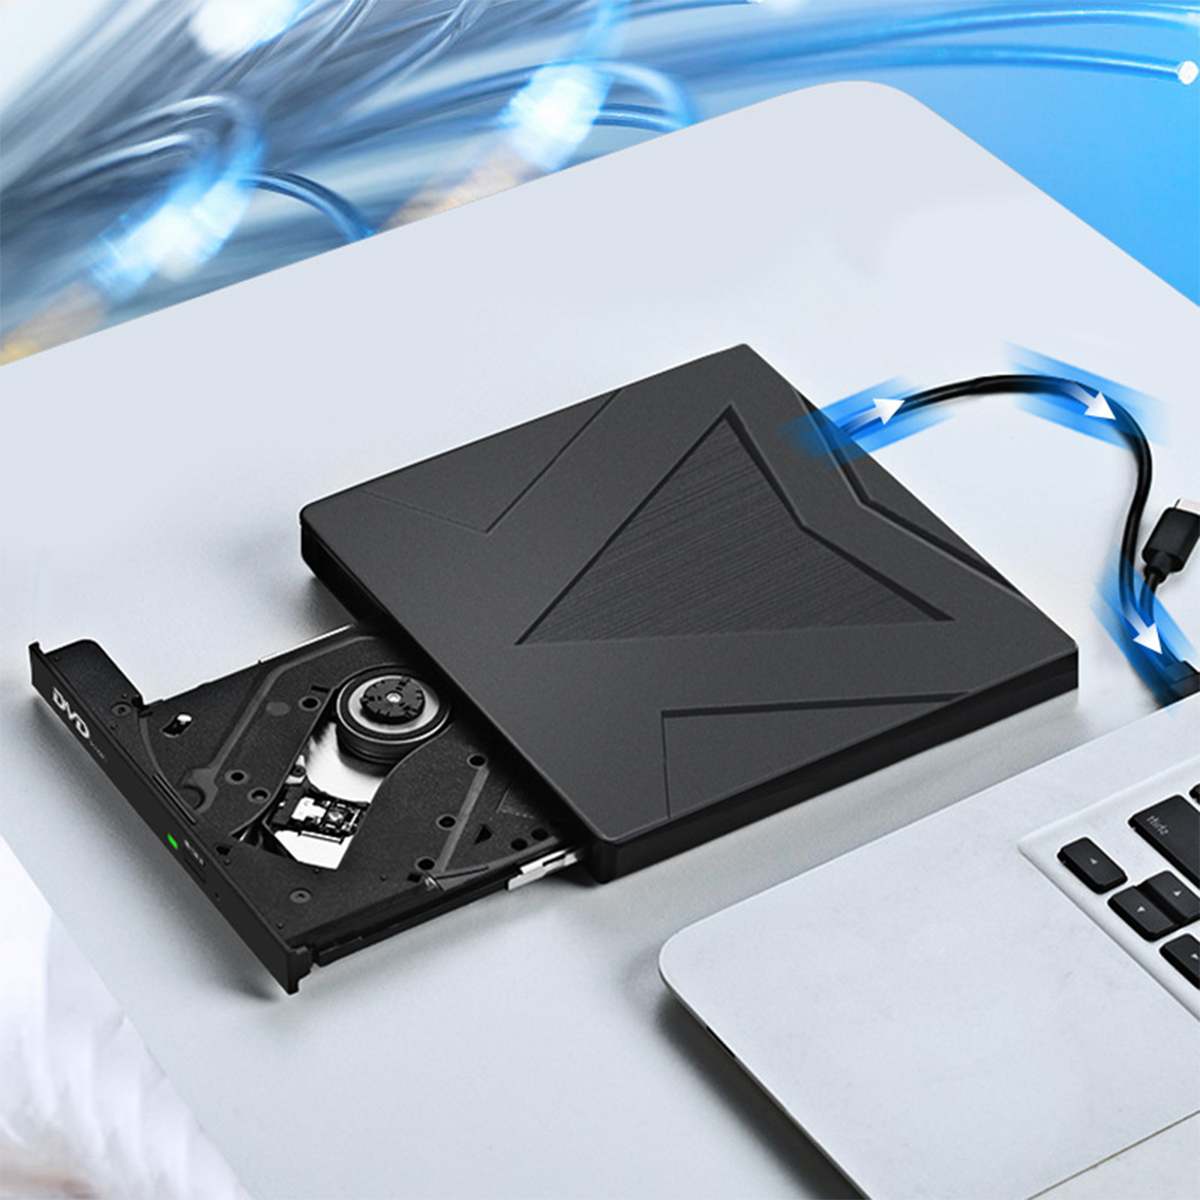 Find USB3 0 Type C External CD DVD Optical Drive High Speed Data Transfer External DVD RW Player External Burner Writer Rewriter for Computer PC Laptop XD012 for Sale on Gipsybee.com with cryptocurrencies